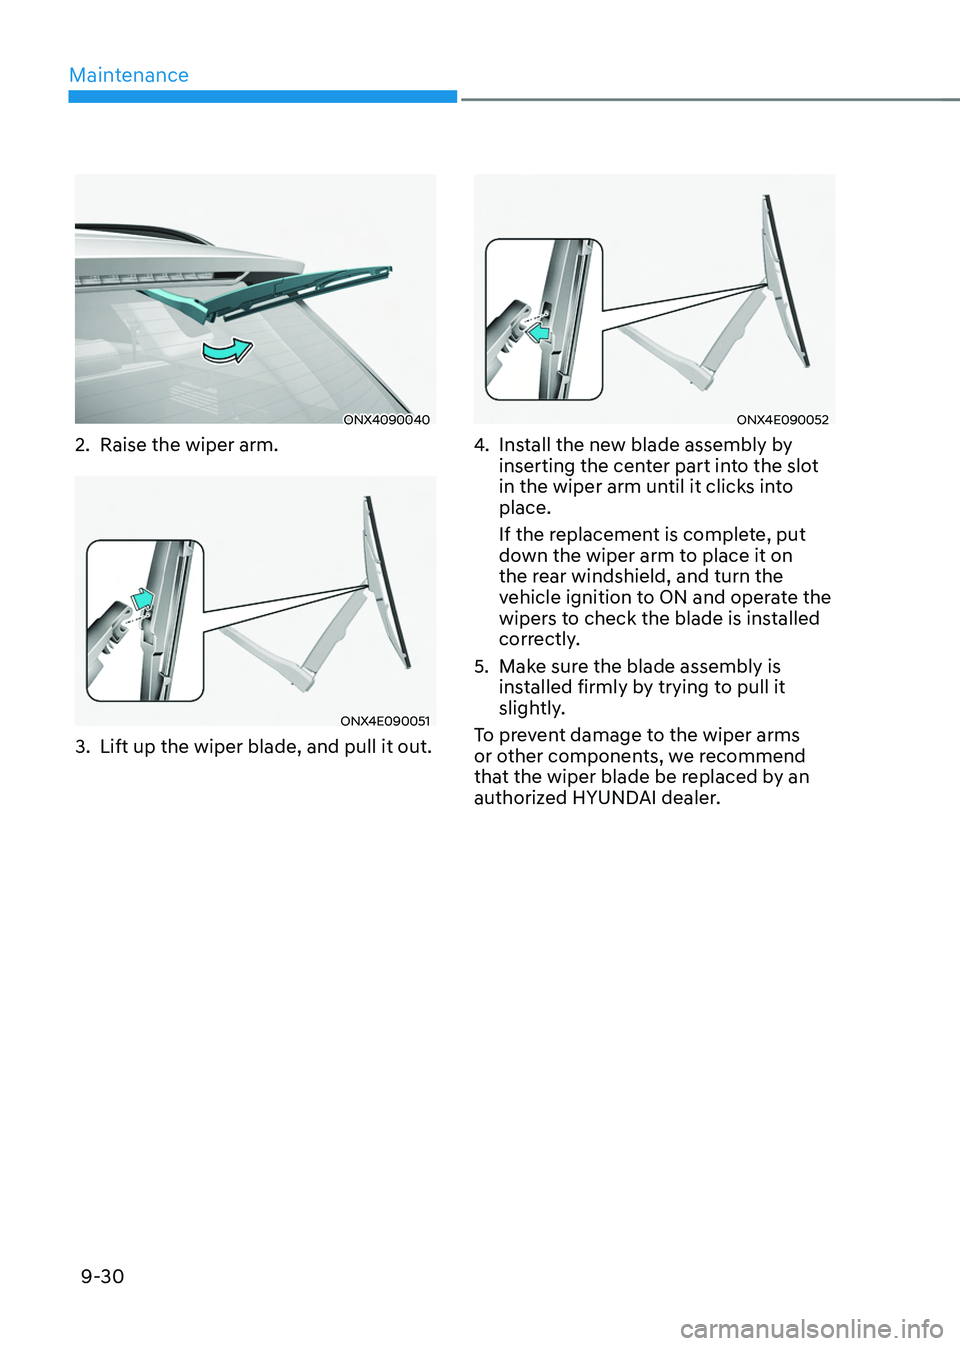 HYUNDAI TUCSON 2022  Owners Manual Maintenance
9-30
ONX4090040
2. Raise the wiper arm.
ONX4E090051
3. Lift up the wiper blade, and pull it out.
ONX4E090052
4. Install the new blade assembly by 
inserting the center part into the slot 
